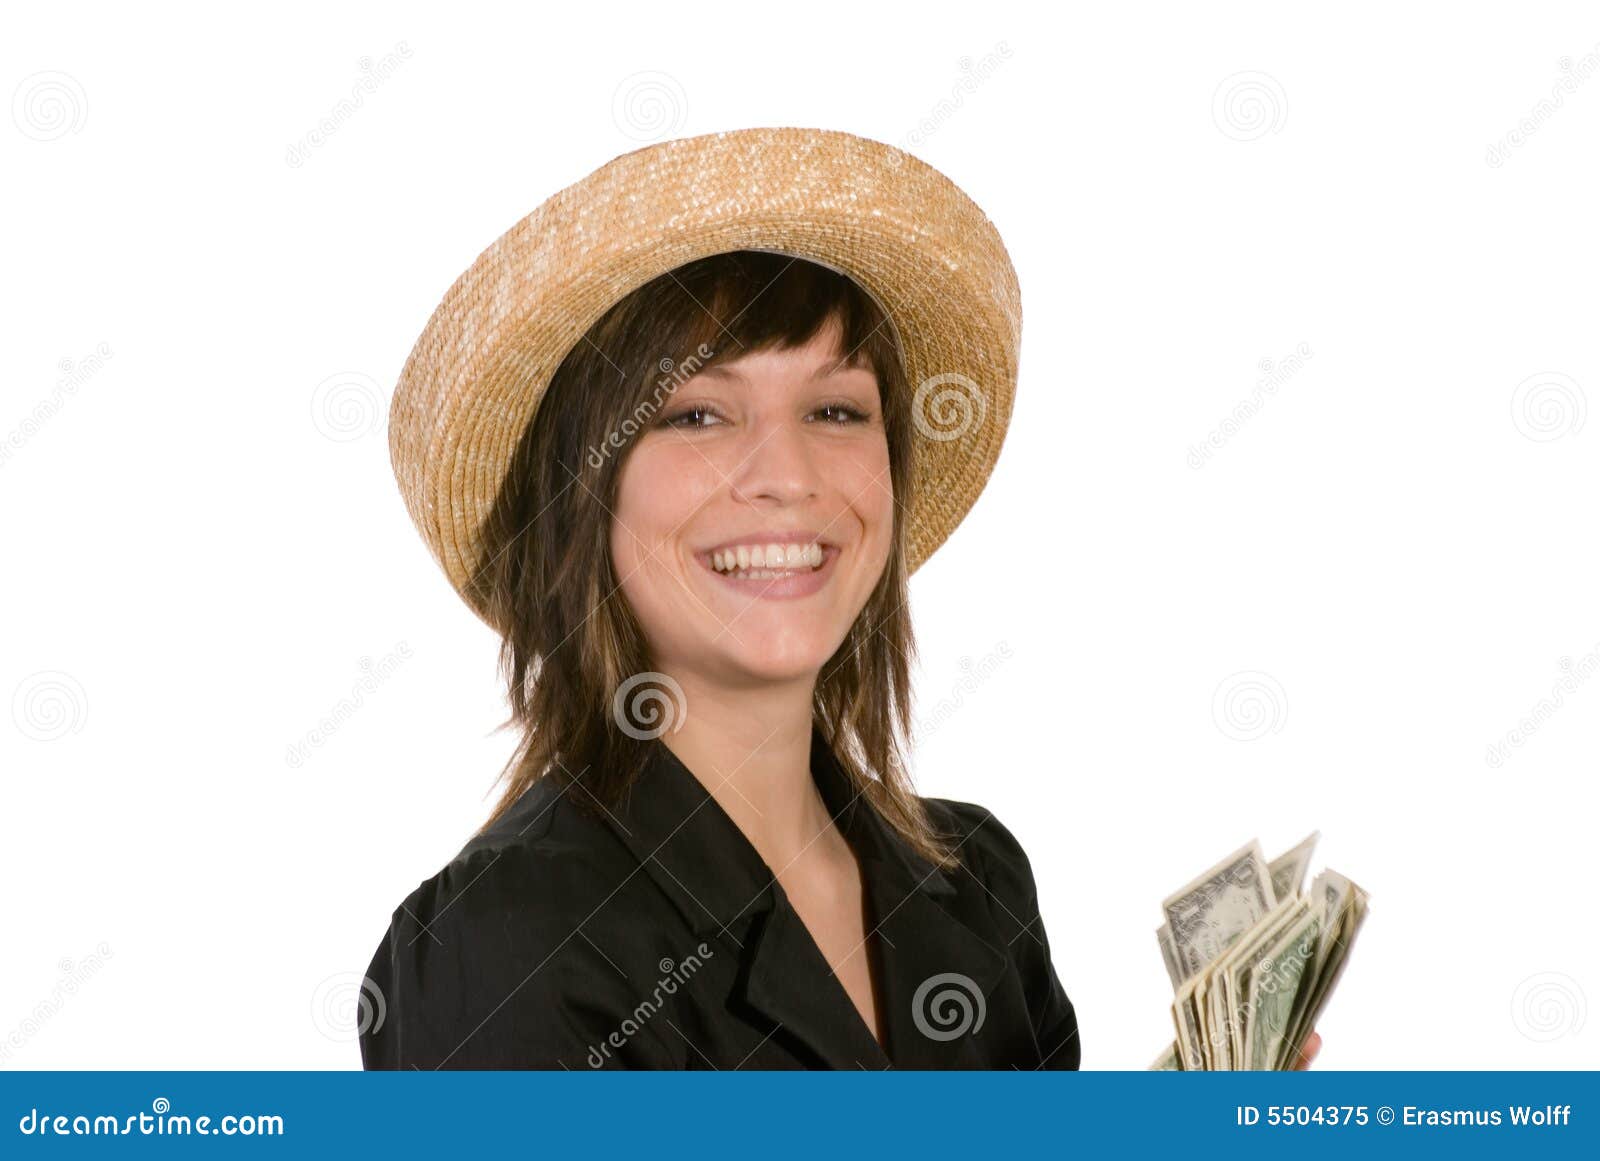 woman with wad of money